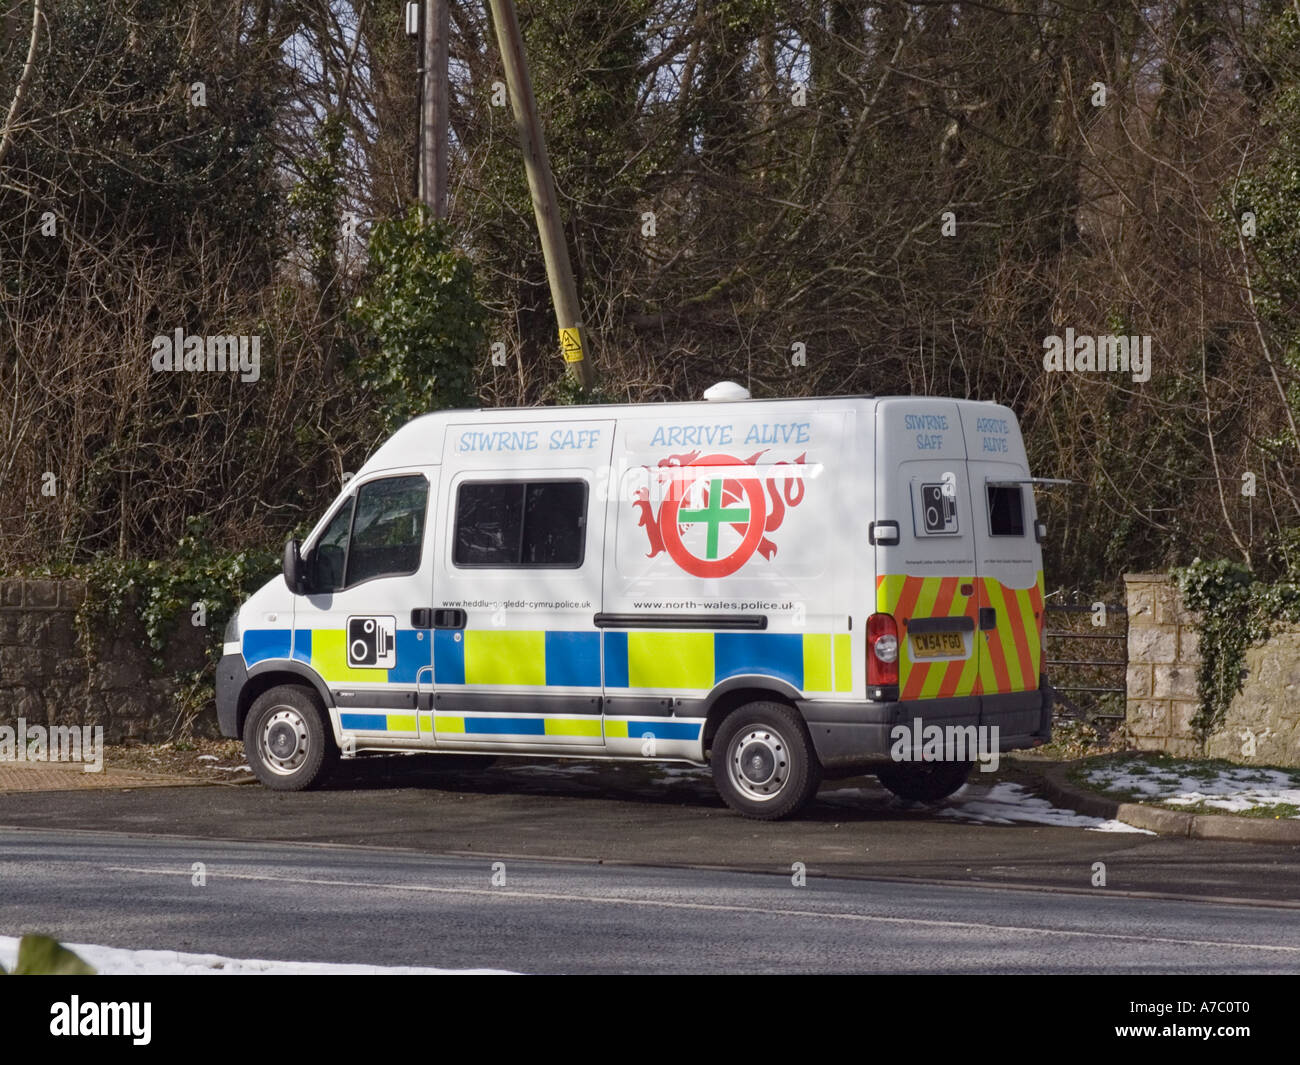 http://c8.alamy.com/comp/A7C0T0/police-mobile-speed-camera-vehicle-parked-beside-road-in-30-mph-speed-A7C0T0.jpg